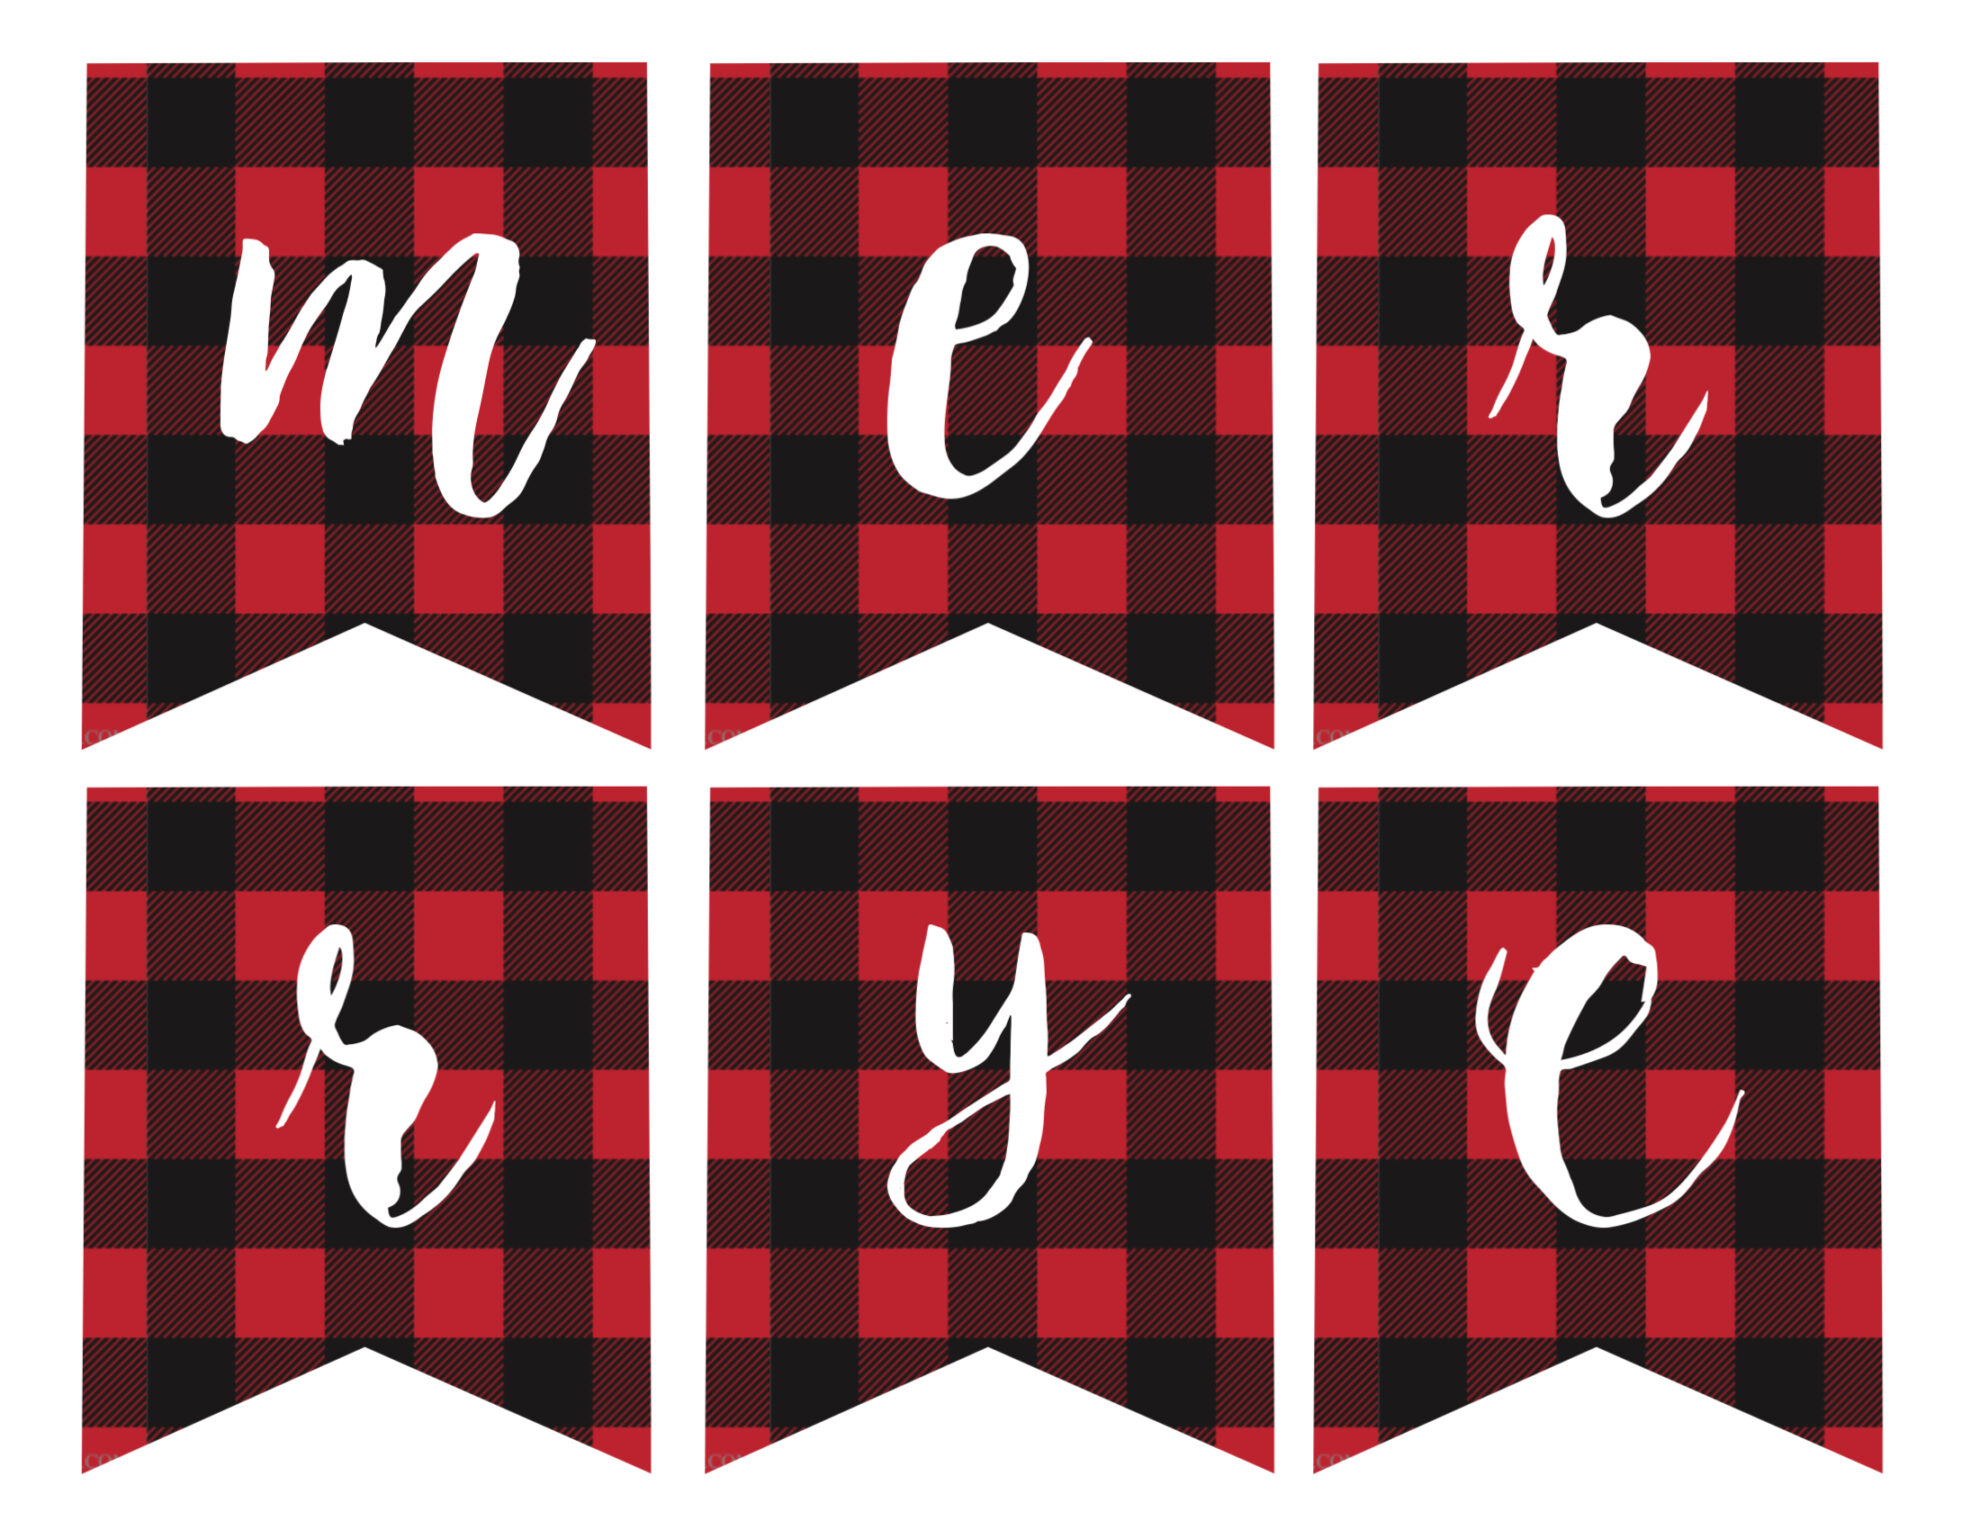 Free Printable Merry Christmas Banner - Paper Trail Design